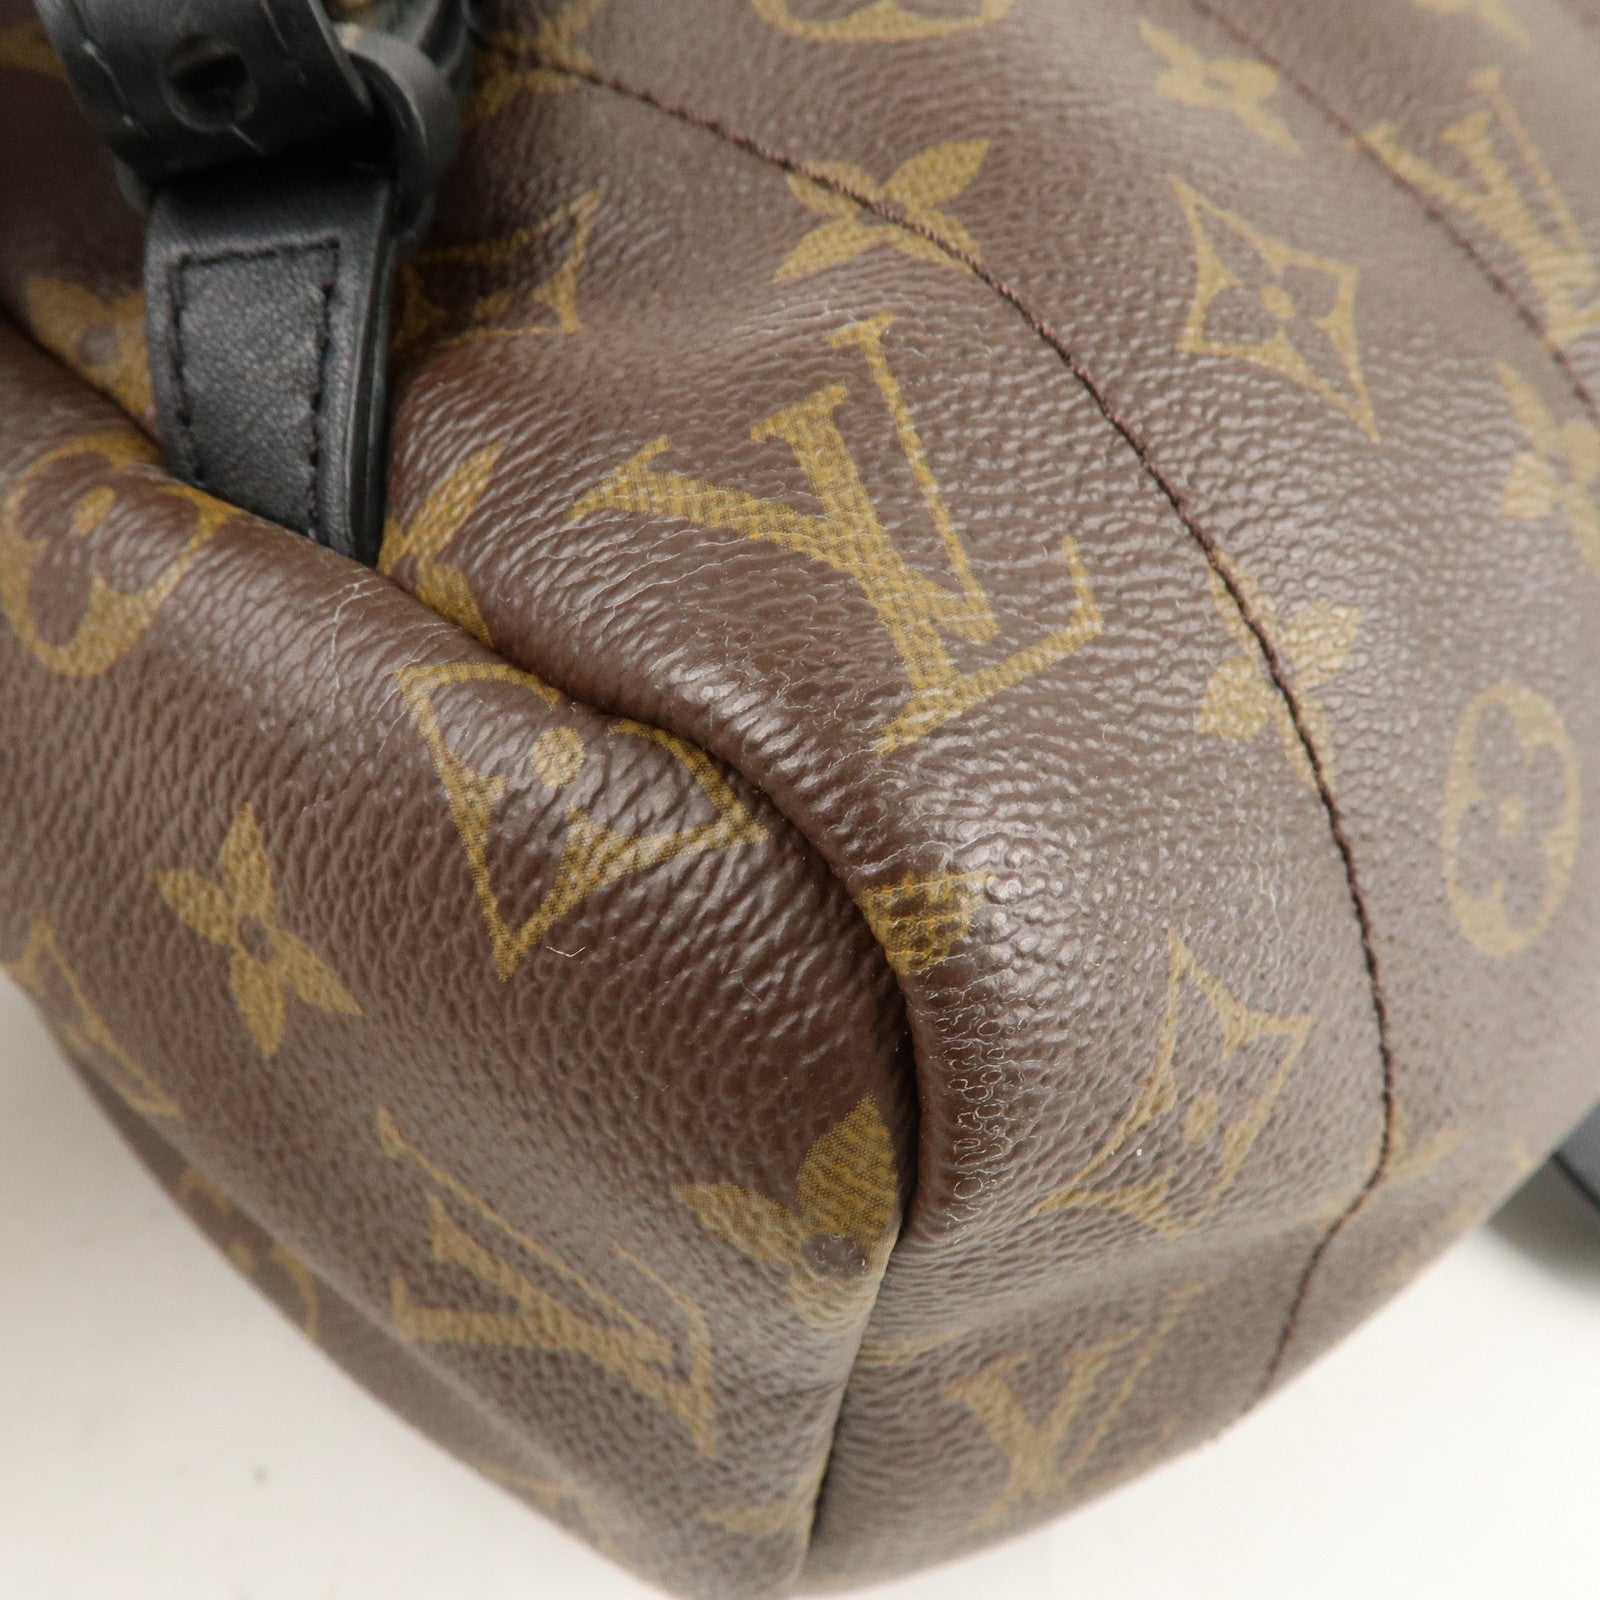 Authentic Louis Vuitton Monogram Palm Springs Backpack MM M41561